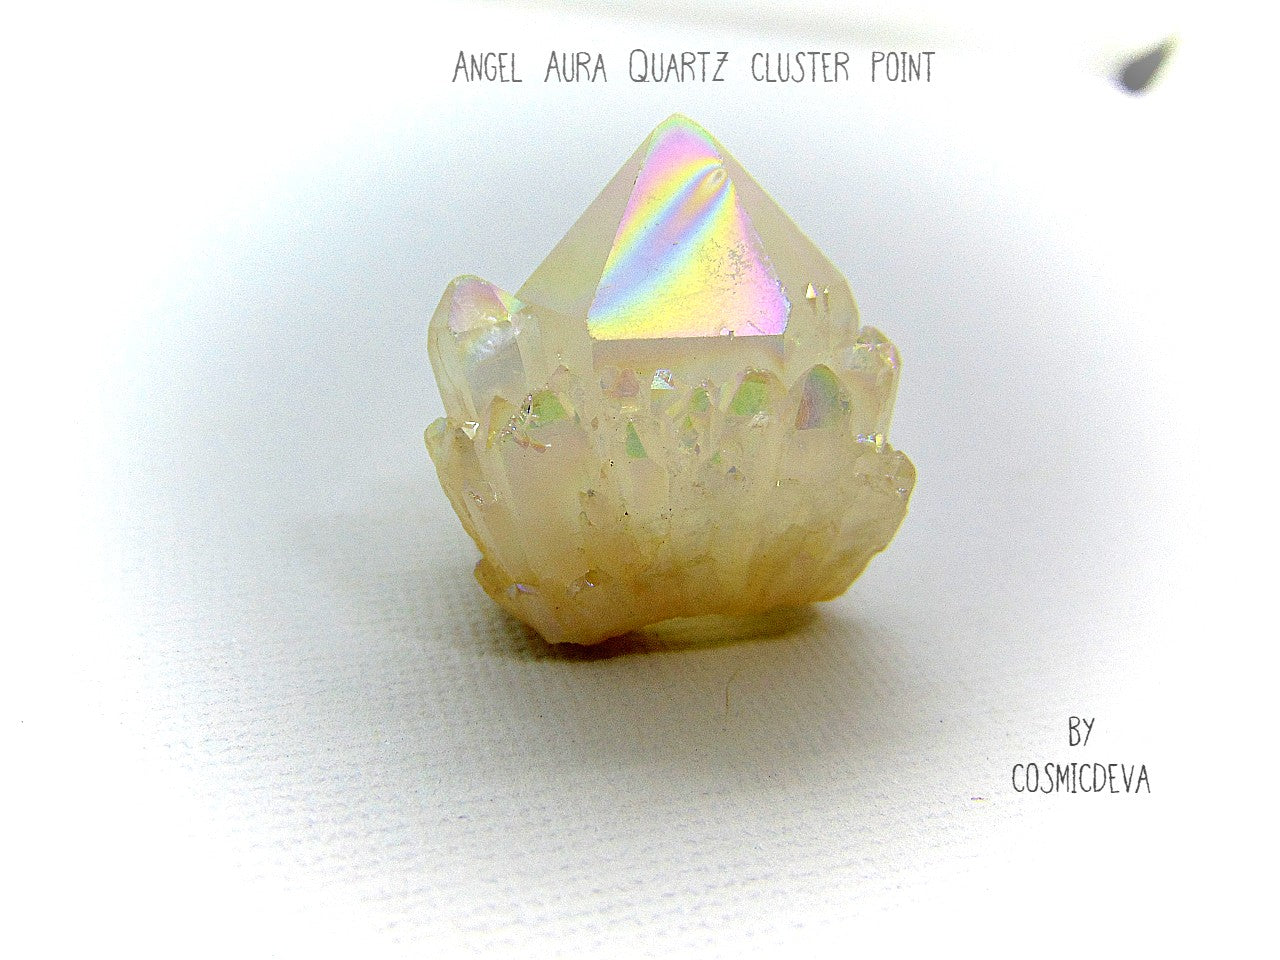 This outstanding shimmering iridescence Angel Aura Quartz crystal point is surrounded with many small crystal clusters around its base. Angel Aura Quartz is natural clear quartz with an infusion of pure titanium, silver and gold. The Natural Clear Quartz Point is placed in a pressurized chamber at high temperature and exposed to pure vaporized precious metal. 